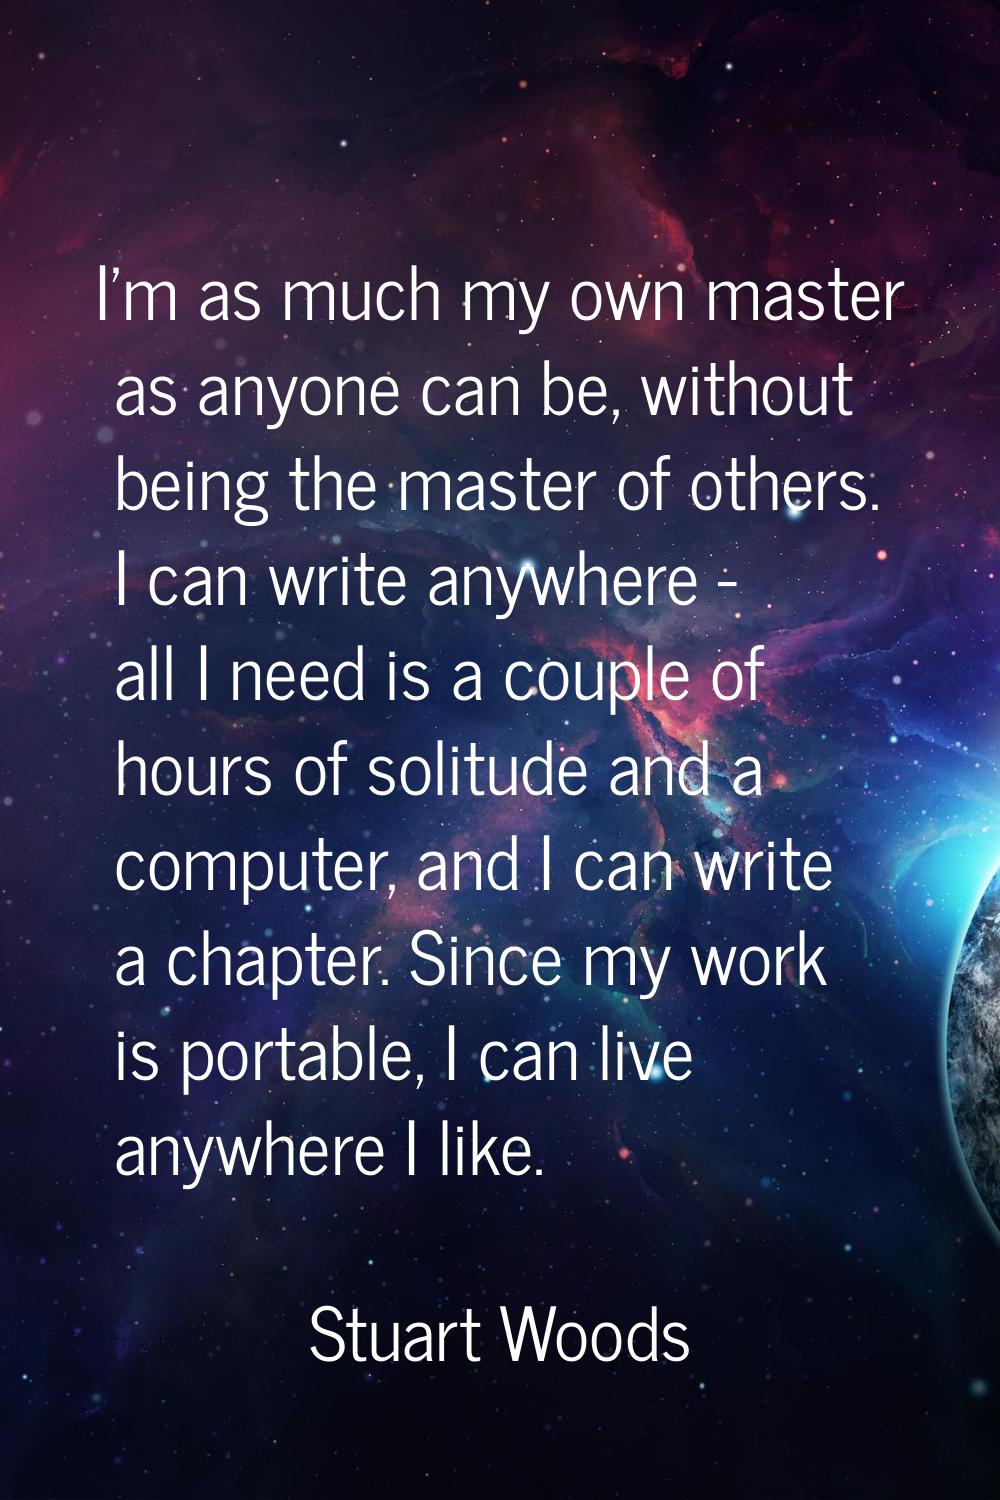 I'm as much my own master as anyone can be, without being the master of others. I can write anywher